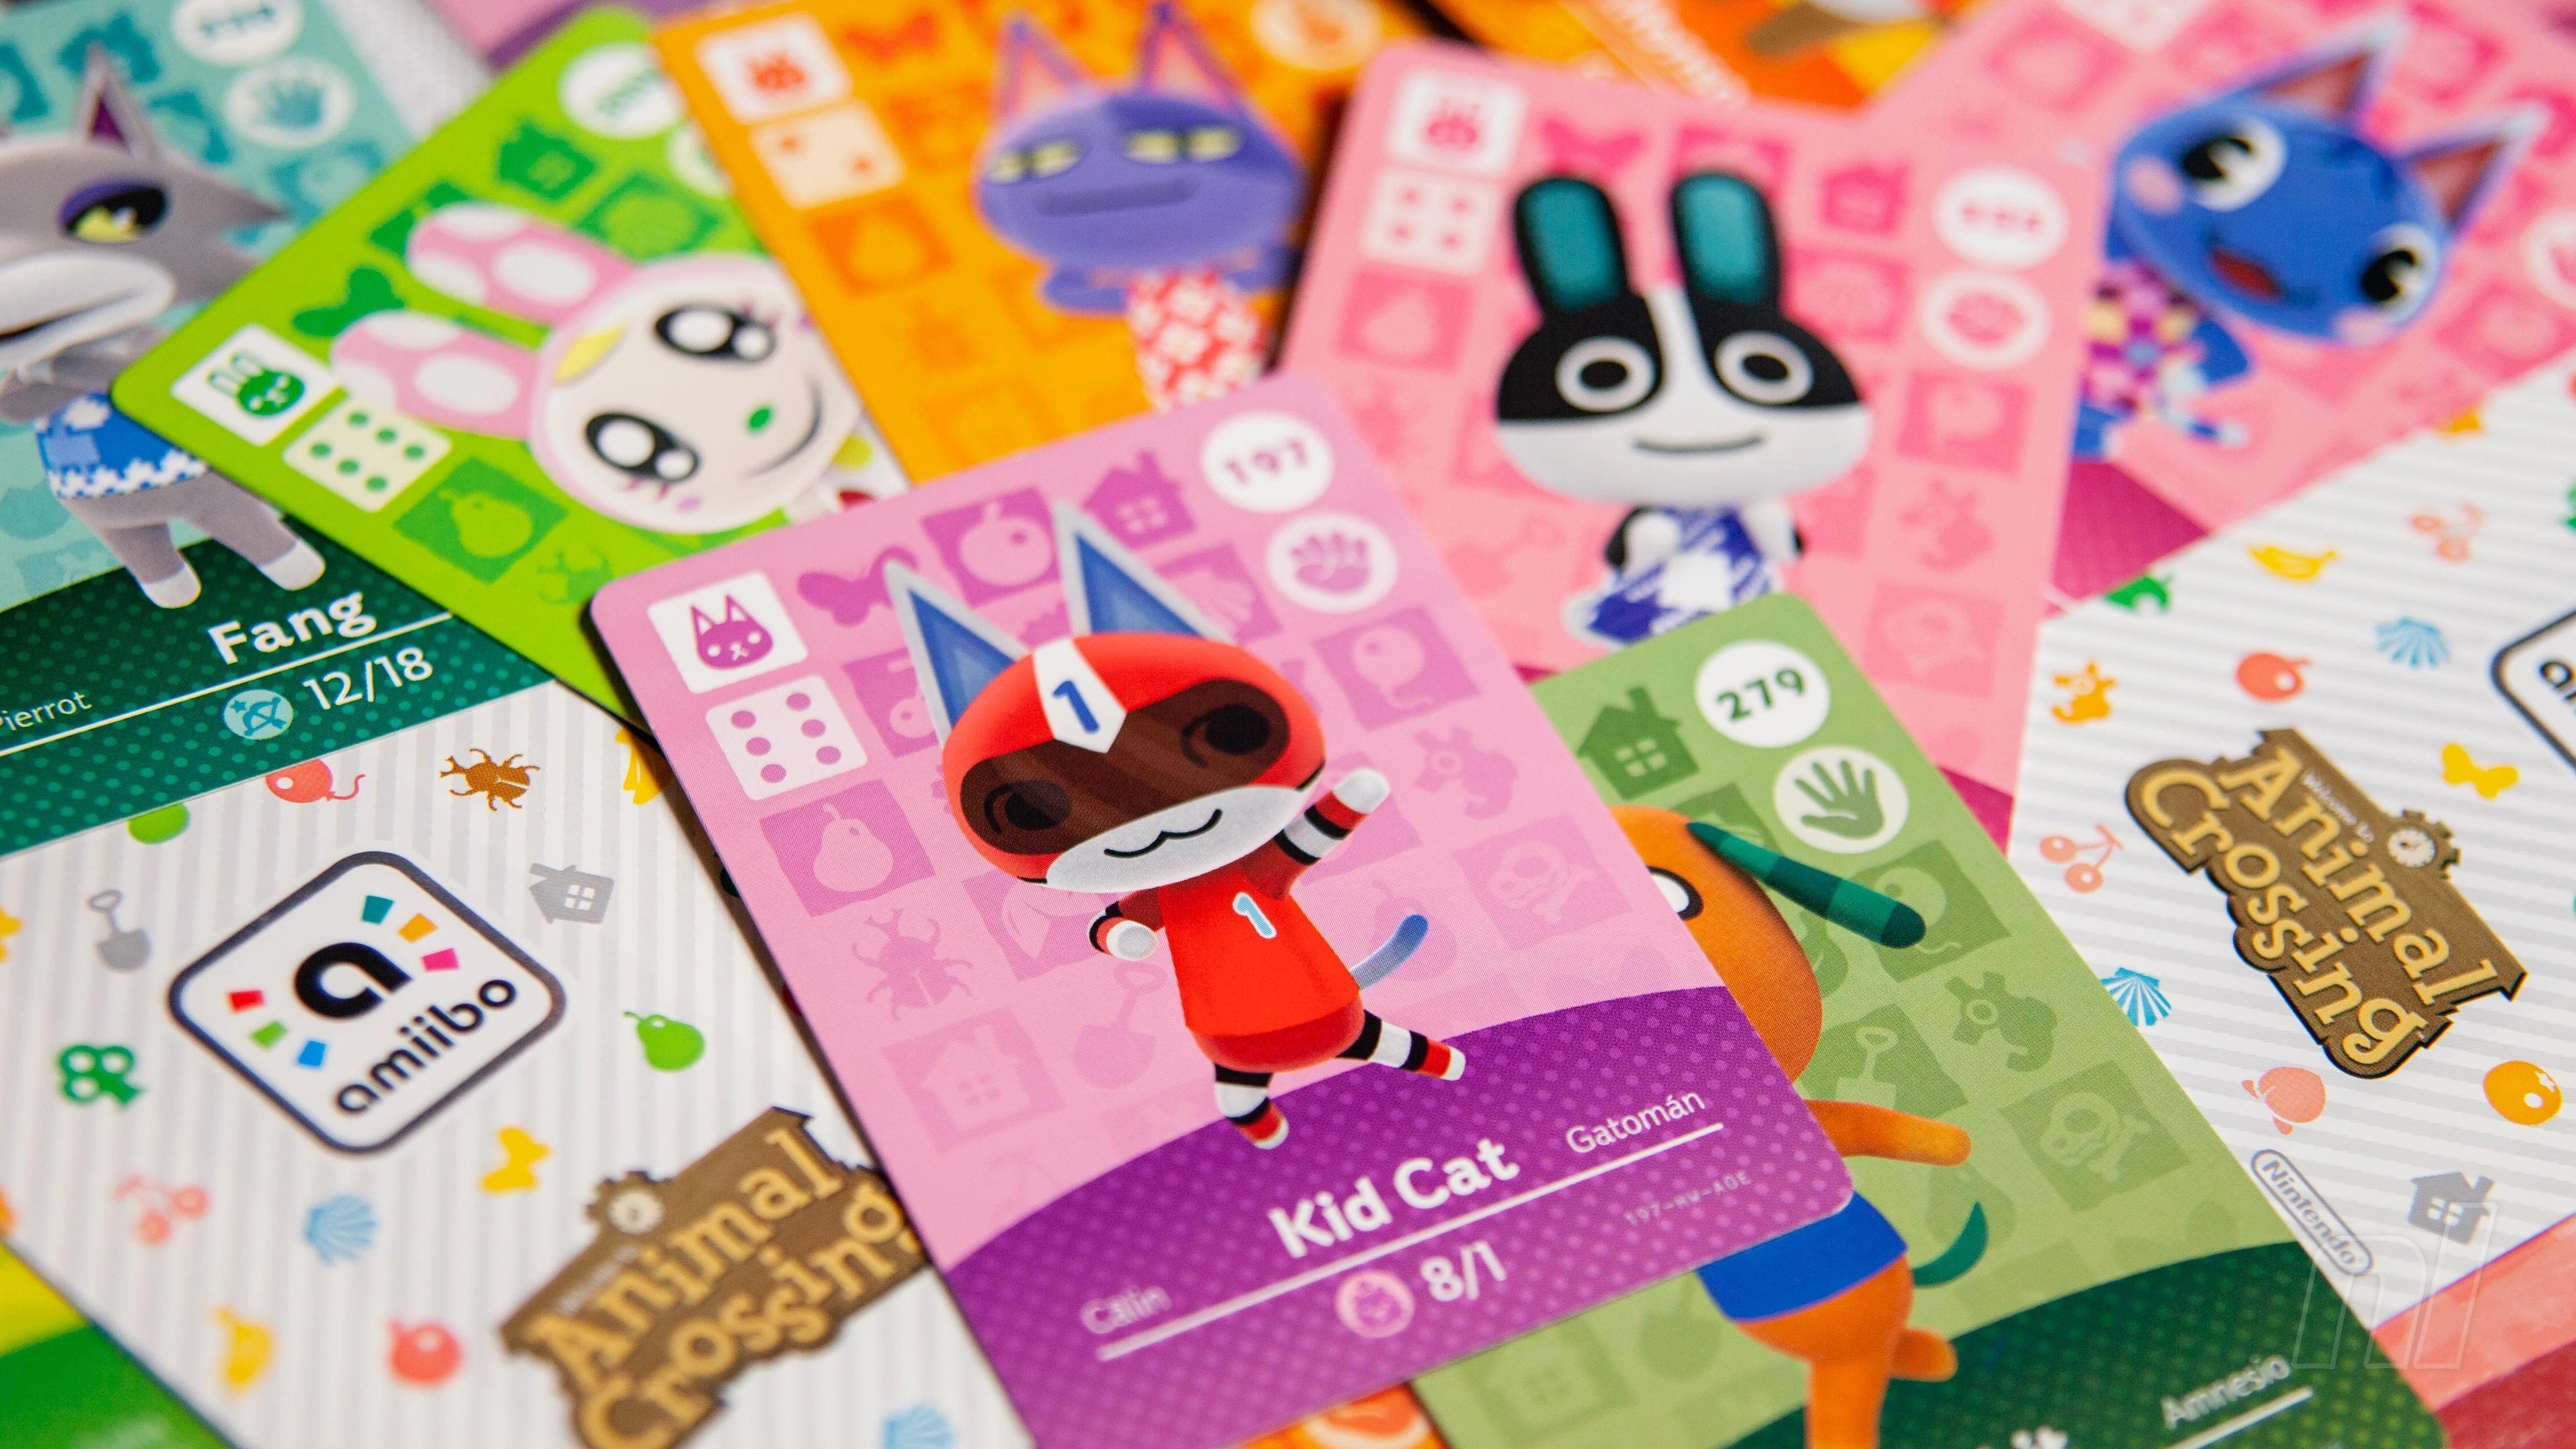 Animal Crossing amiibo Cards Are Getting Restocks In Other Parts Of The